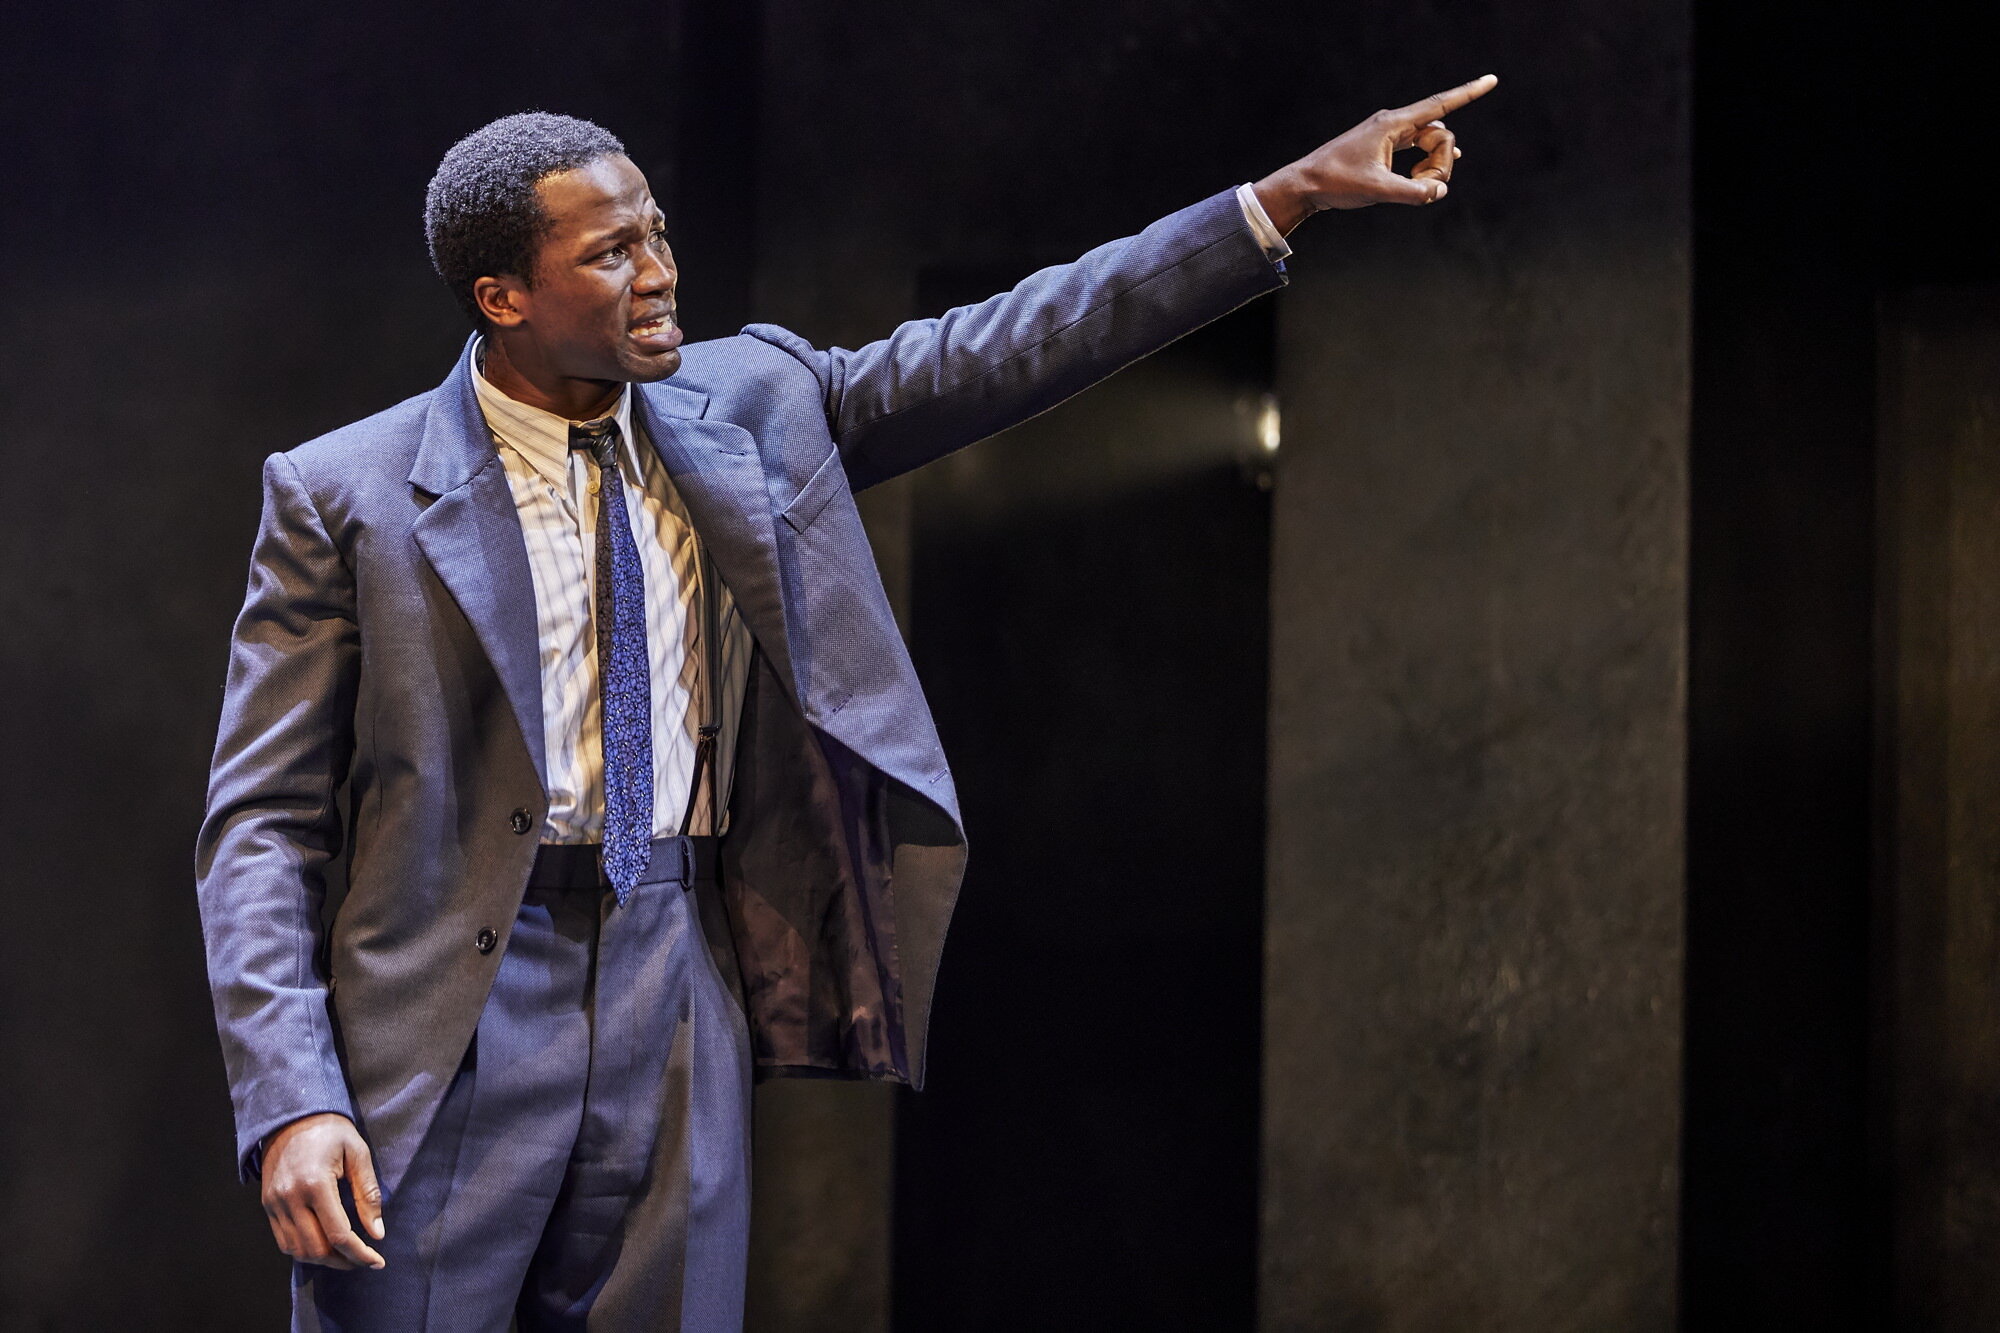    Death of a Salesman  , Piccadilly Theatre, London 